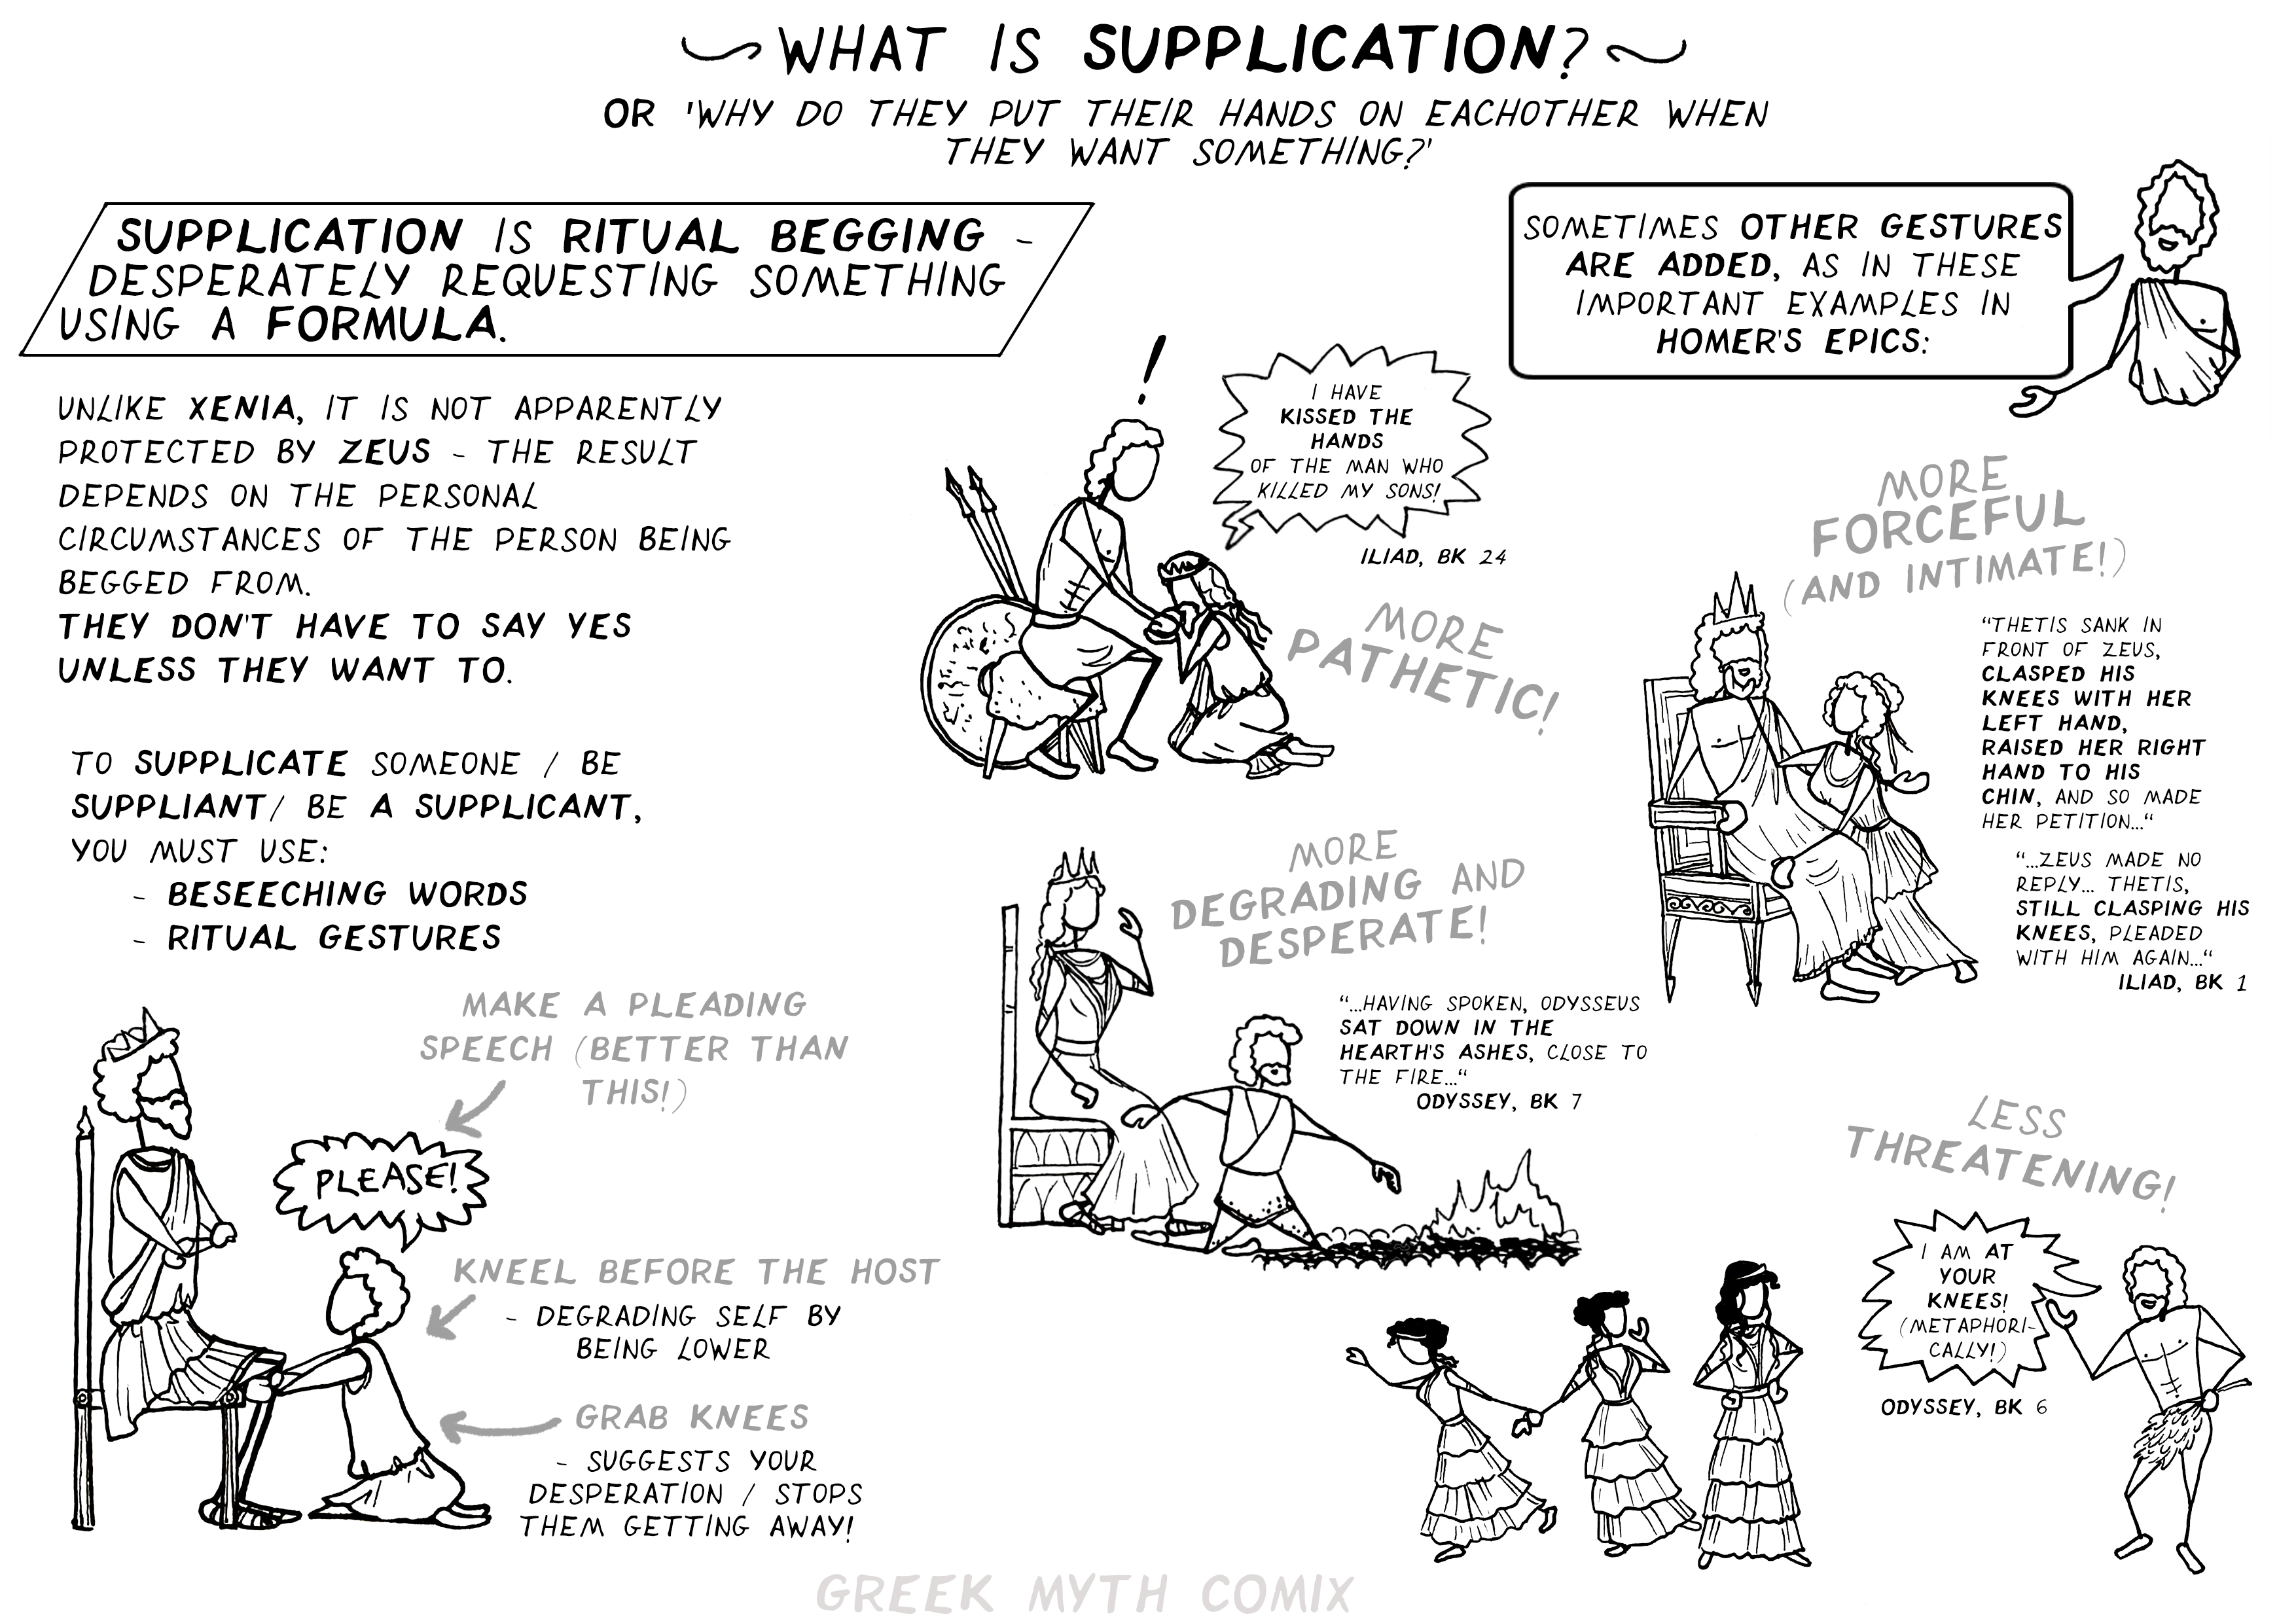 Stick-man comic with a lot of text, under the title "What is Supplication? or, ‘why do they put their hands on eachother when they want something in Ancient Greek Epic?’". Text at the top left: Supplication is ritual begging -desperately requesting something using a formula. Beneath it, it says: "Unlike xenia, it is not apparently protected by Zeus -the result depends on the personal circumstances of the person being begged from". (in bald:) "They don't have to say yes unless they want to". Beneath, more text: "To supplicate someone / be suppliant / be a supplicant, you must: use: - Beseeching words - Ritual gestures.". The text accompanied by the image of a stick-person on their knees, saying "please" to a king sitting in a throne. The captions says: Make a pleading speech (better than this!), kneel before the host - degrading self by being lower, grab knees - suggests your desperation / stops them getting away. On the top right, there is a stick man saying: "Sometimes, other gestures are added, as in these important examples in Homer's epics". This is followed by a series of drawings of those epics, with captions. Iliad, BK 24: woman kneeling and kissing warrior's hand, there's an excalation sign on top of his head. She says: "I have kissed the hands of the man who killed my sons". Underneath, the caption says: "More pathetic!". Iliad, BK 1: woman in a position ressembling kneeling, but not quite it, standing very close to a king on a throne, grabbing his leg with one hand, and his face with the other. The caption says: "More forceful (and intimate!). The quotation from the text says: "Thetis sank in front of Zeus, clasped his knees with her left hand, raised her right hand to his chin, and so made her petition..." "Zeus made no reply... Thetis, still clasping his knees, pleaded with him, again...". Odyssey, BK 7. The caption says: "More degrading and desperate". Drawing of a man kneeling between a queen sitting on a throne, and a pyre of fire. The quotation says: "Having spoken, Odysseus sat down in the hearth's ashes, close to the fire". Lastly, Odyssey, BK 6. There is a group of three women standing in line before a naked man. The first woman faces him, standing her ground firmly, the last one is moving away, taking the one in the middle with her. The man says: "I am at your knees" (metaphorically). The caption says: "Less threatening!"